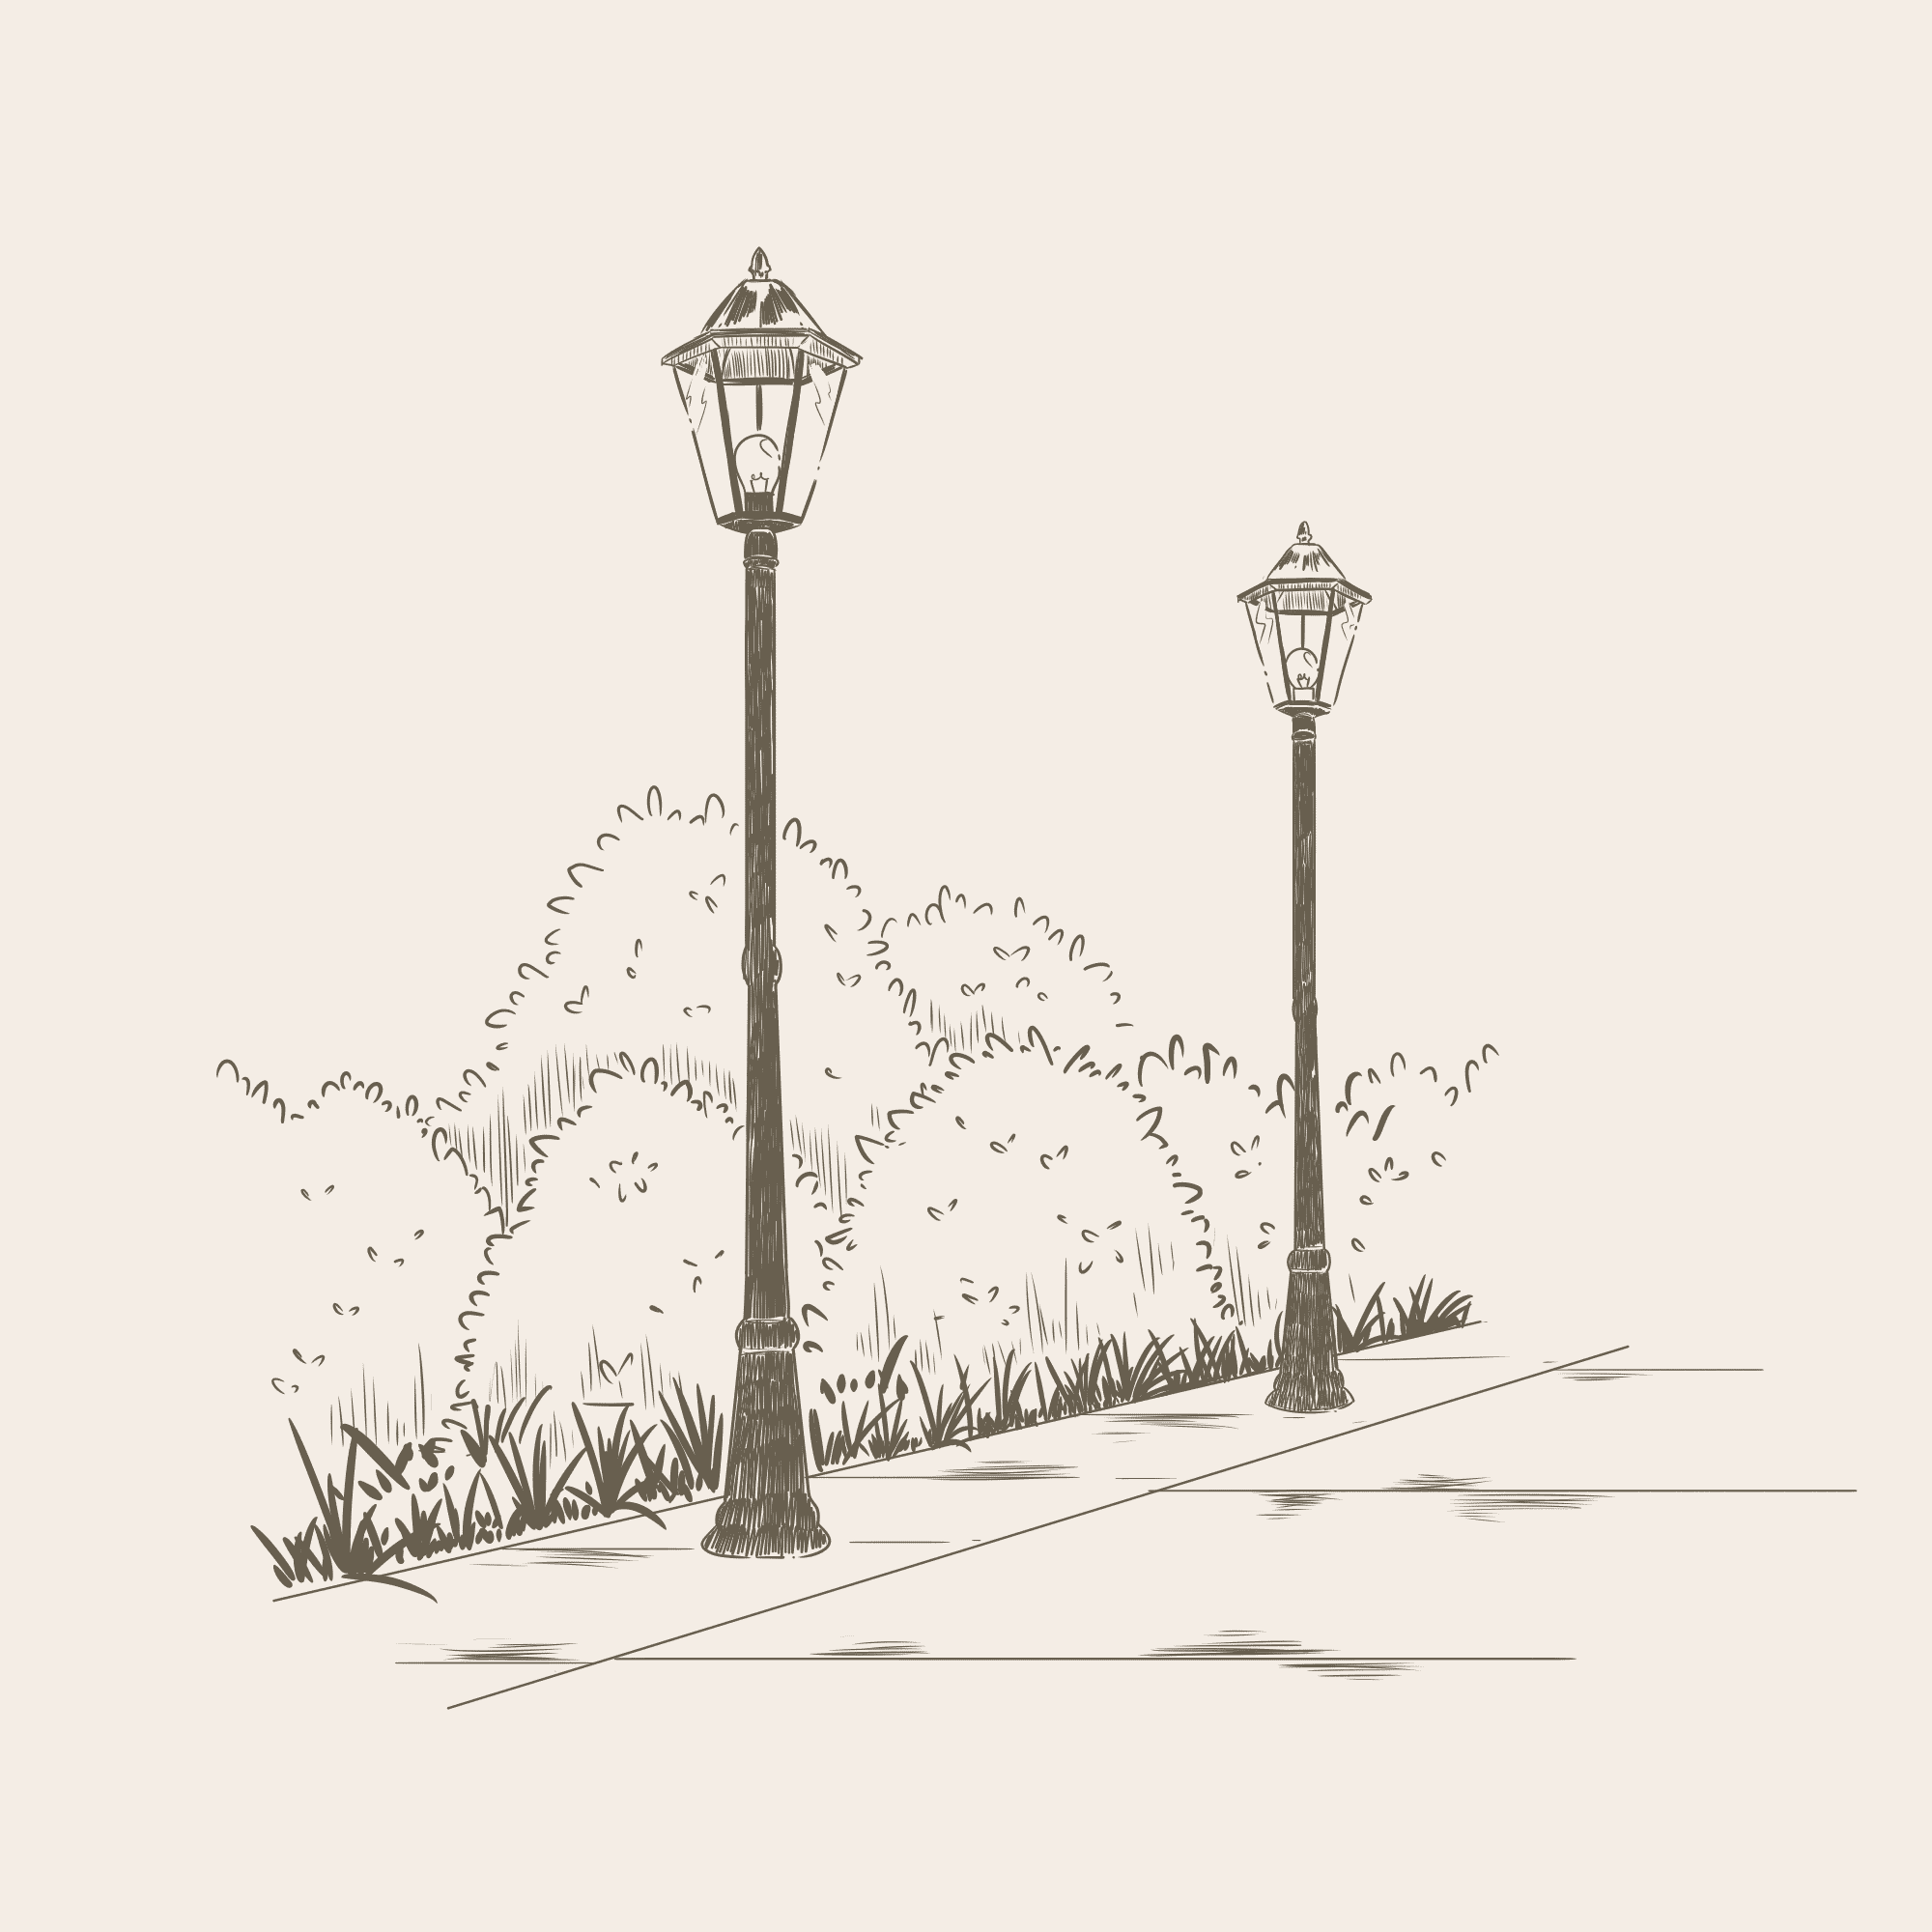 Street Lamp Drawings for Sale (Page #2 of 5) - Fine Art America